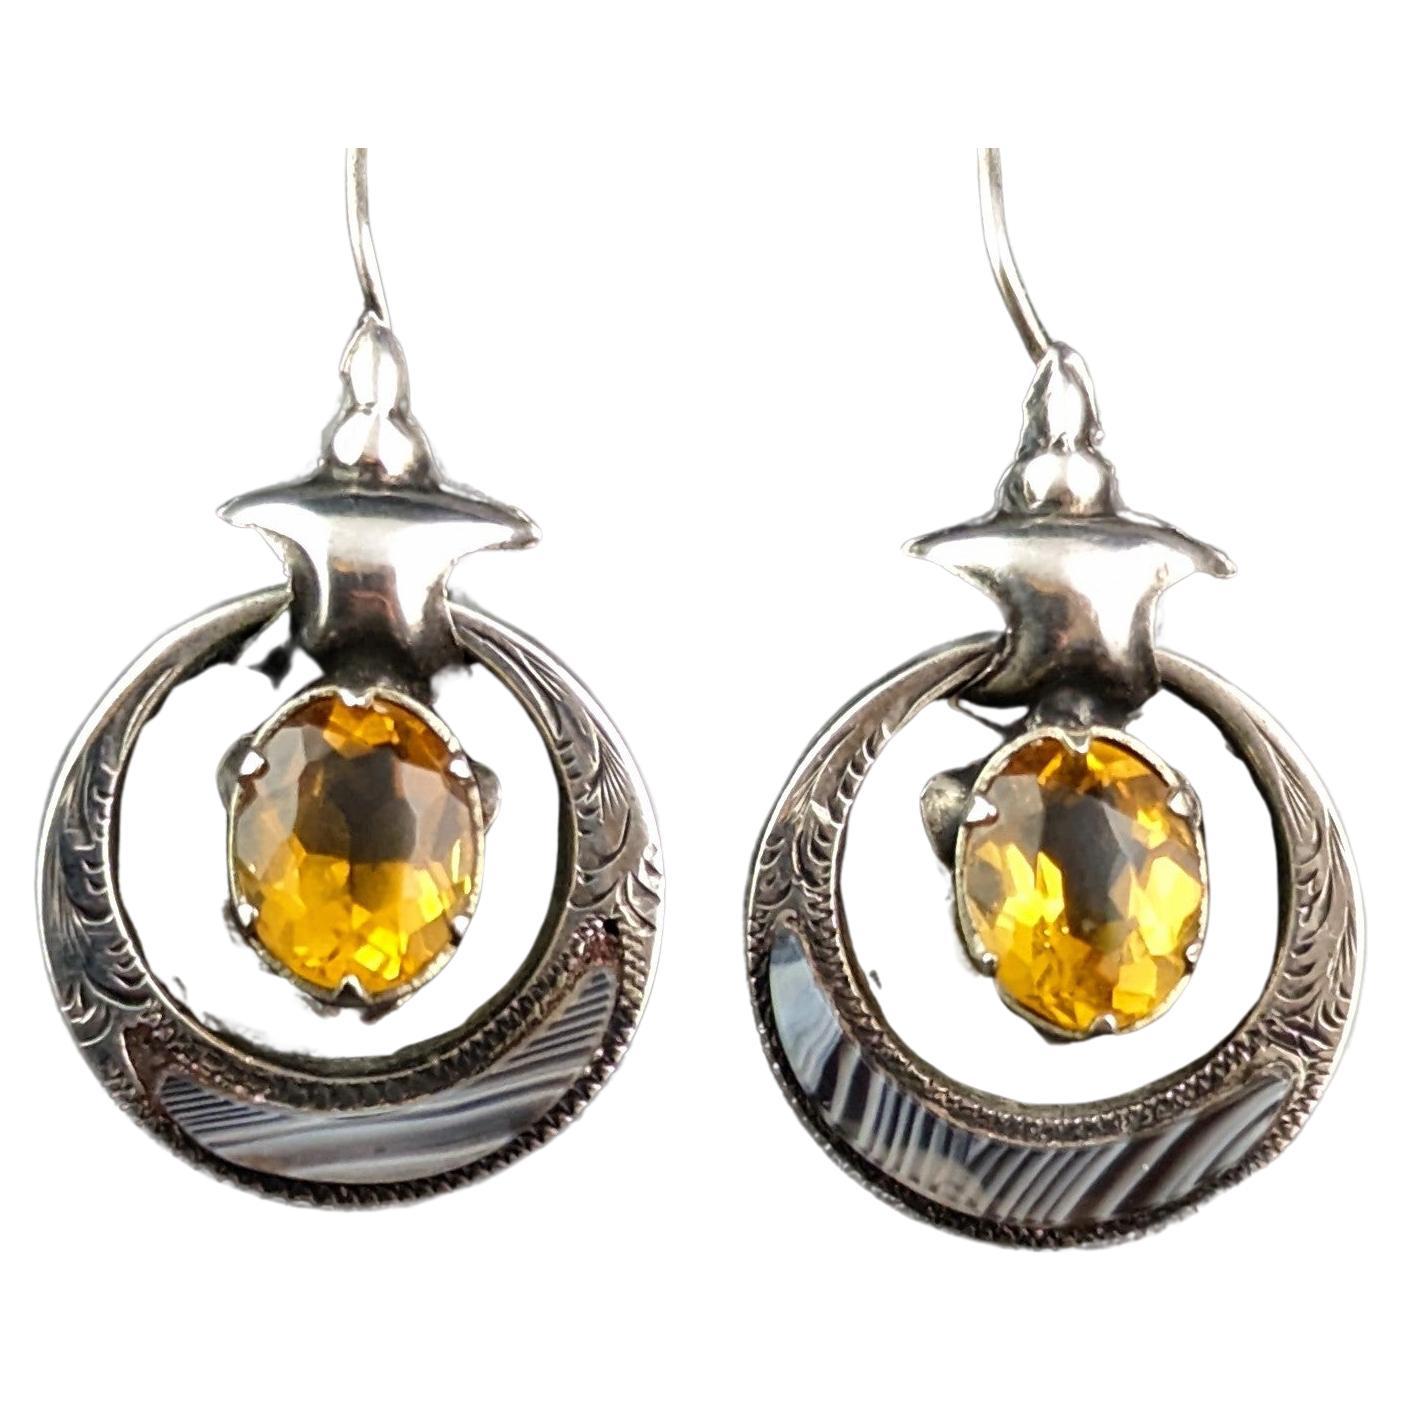 Antique Victorian Scottish agate drop earrings, Sterling silver 